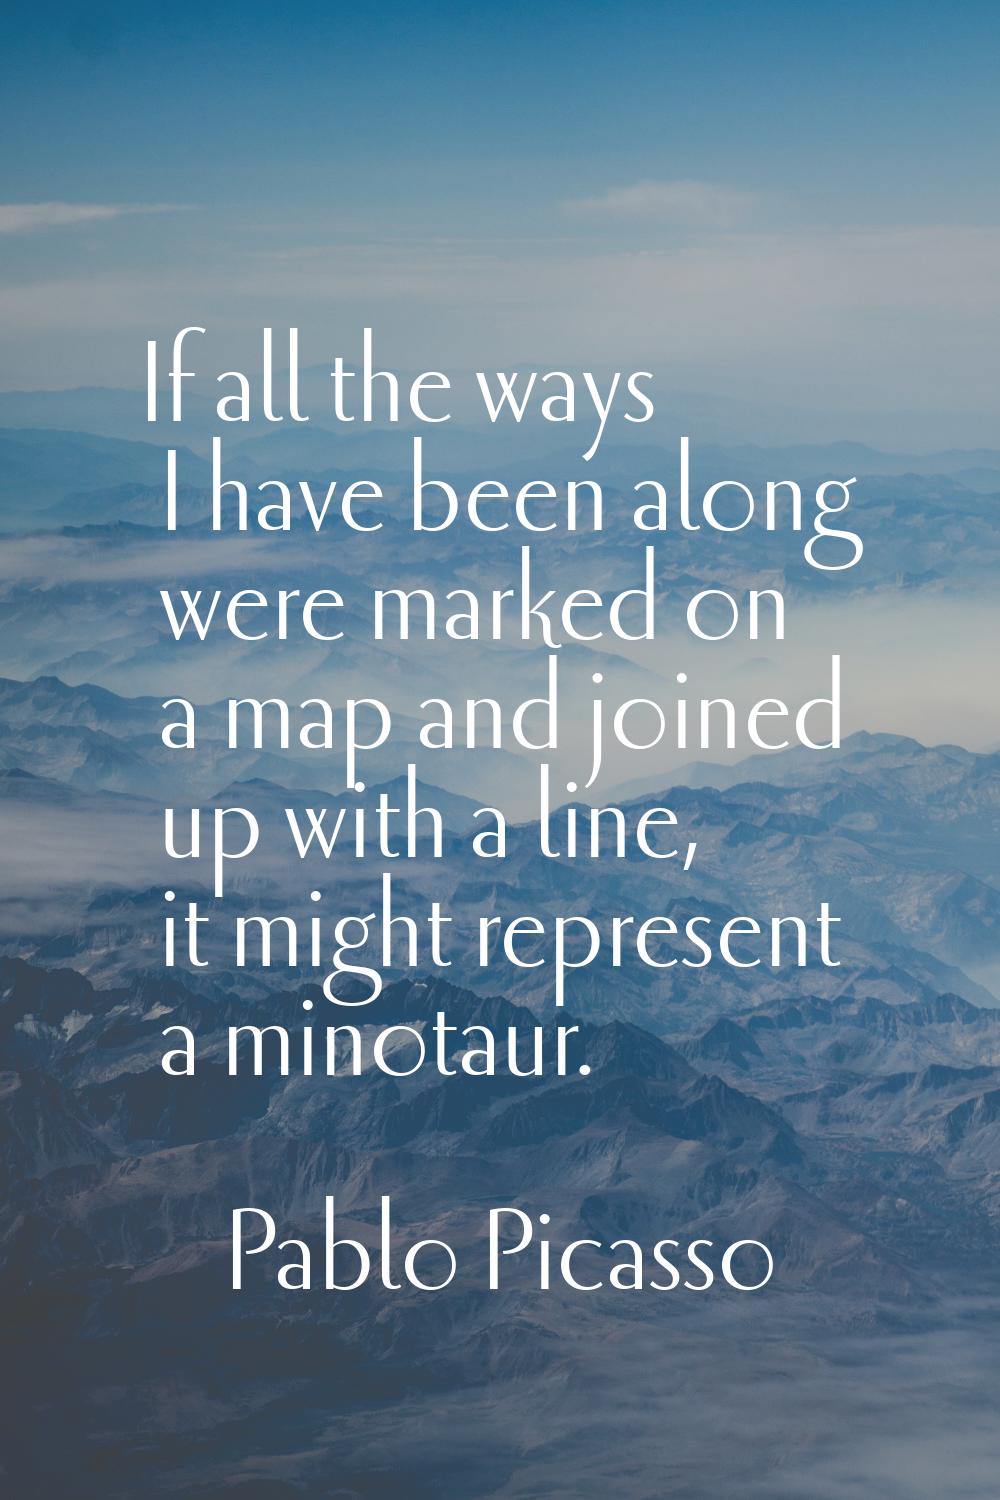 If all the ways I have been along were marked on a map and joined up with a line, it might represen